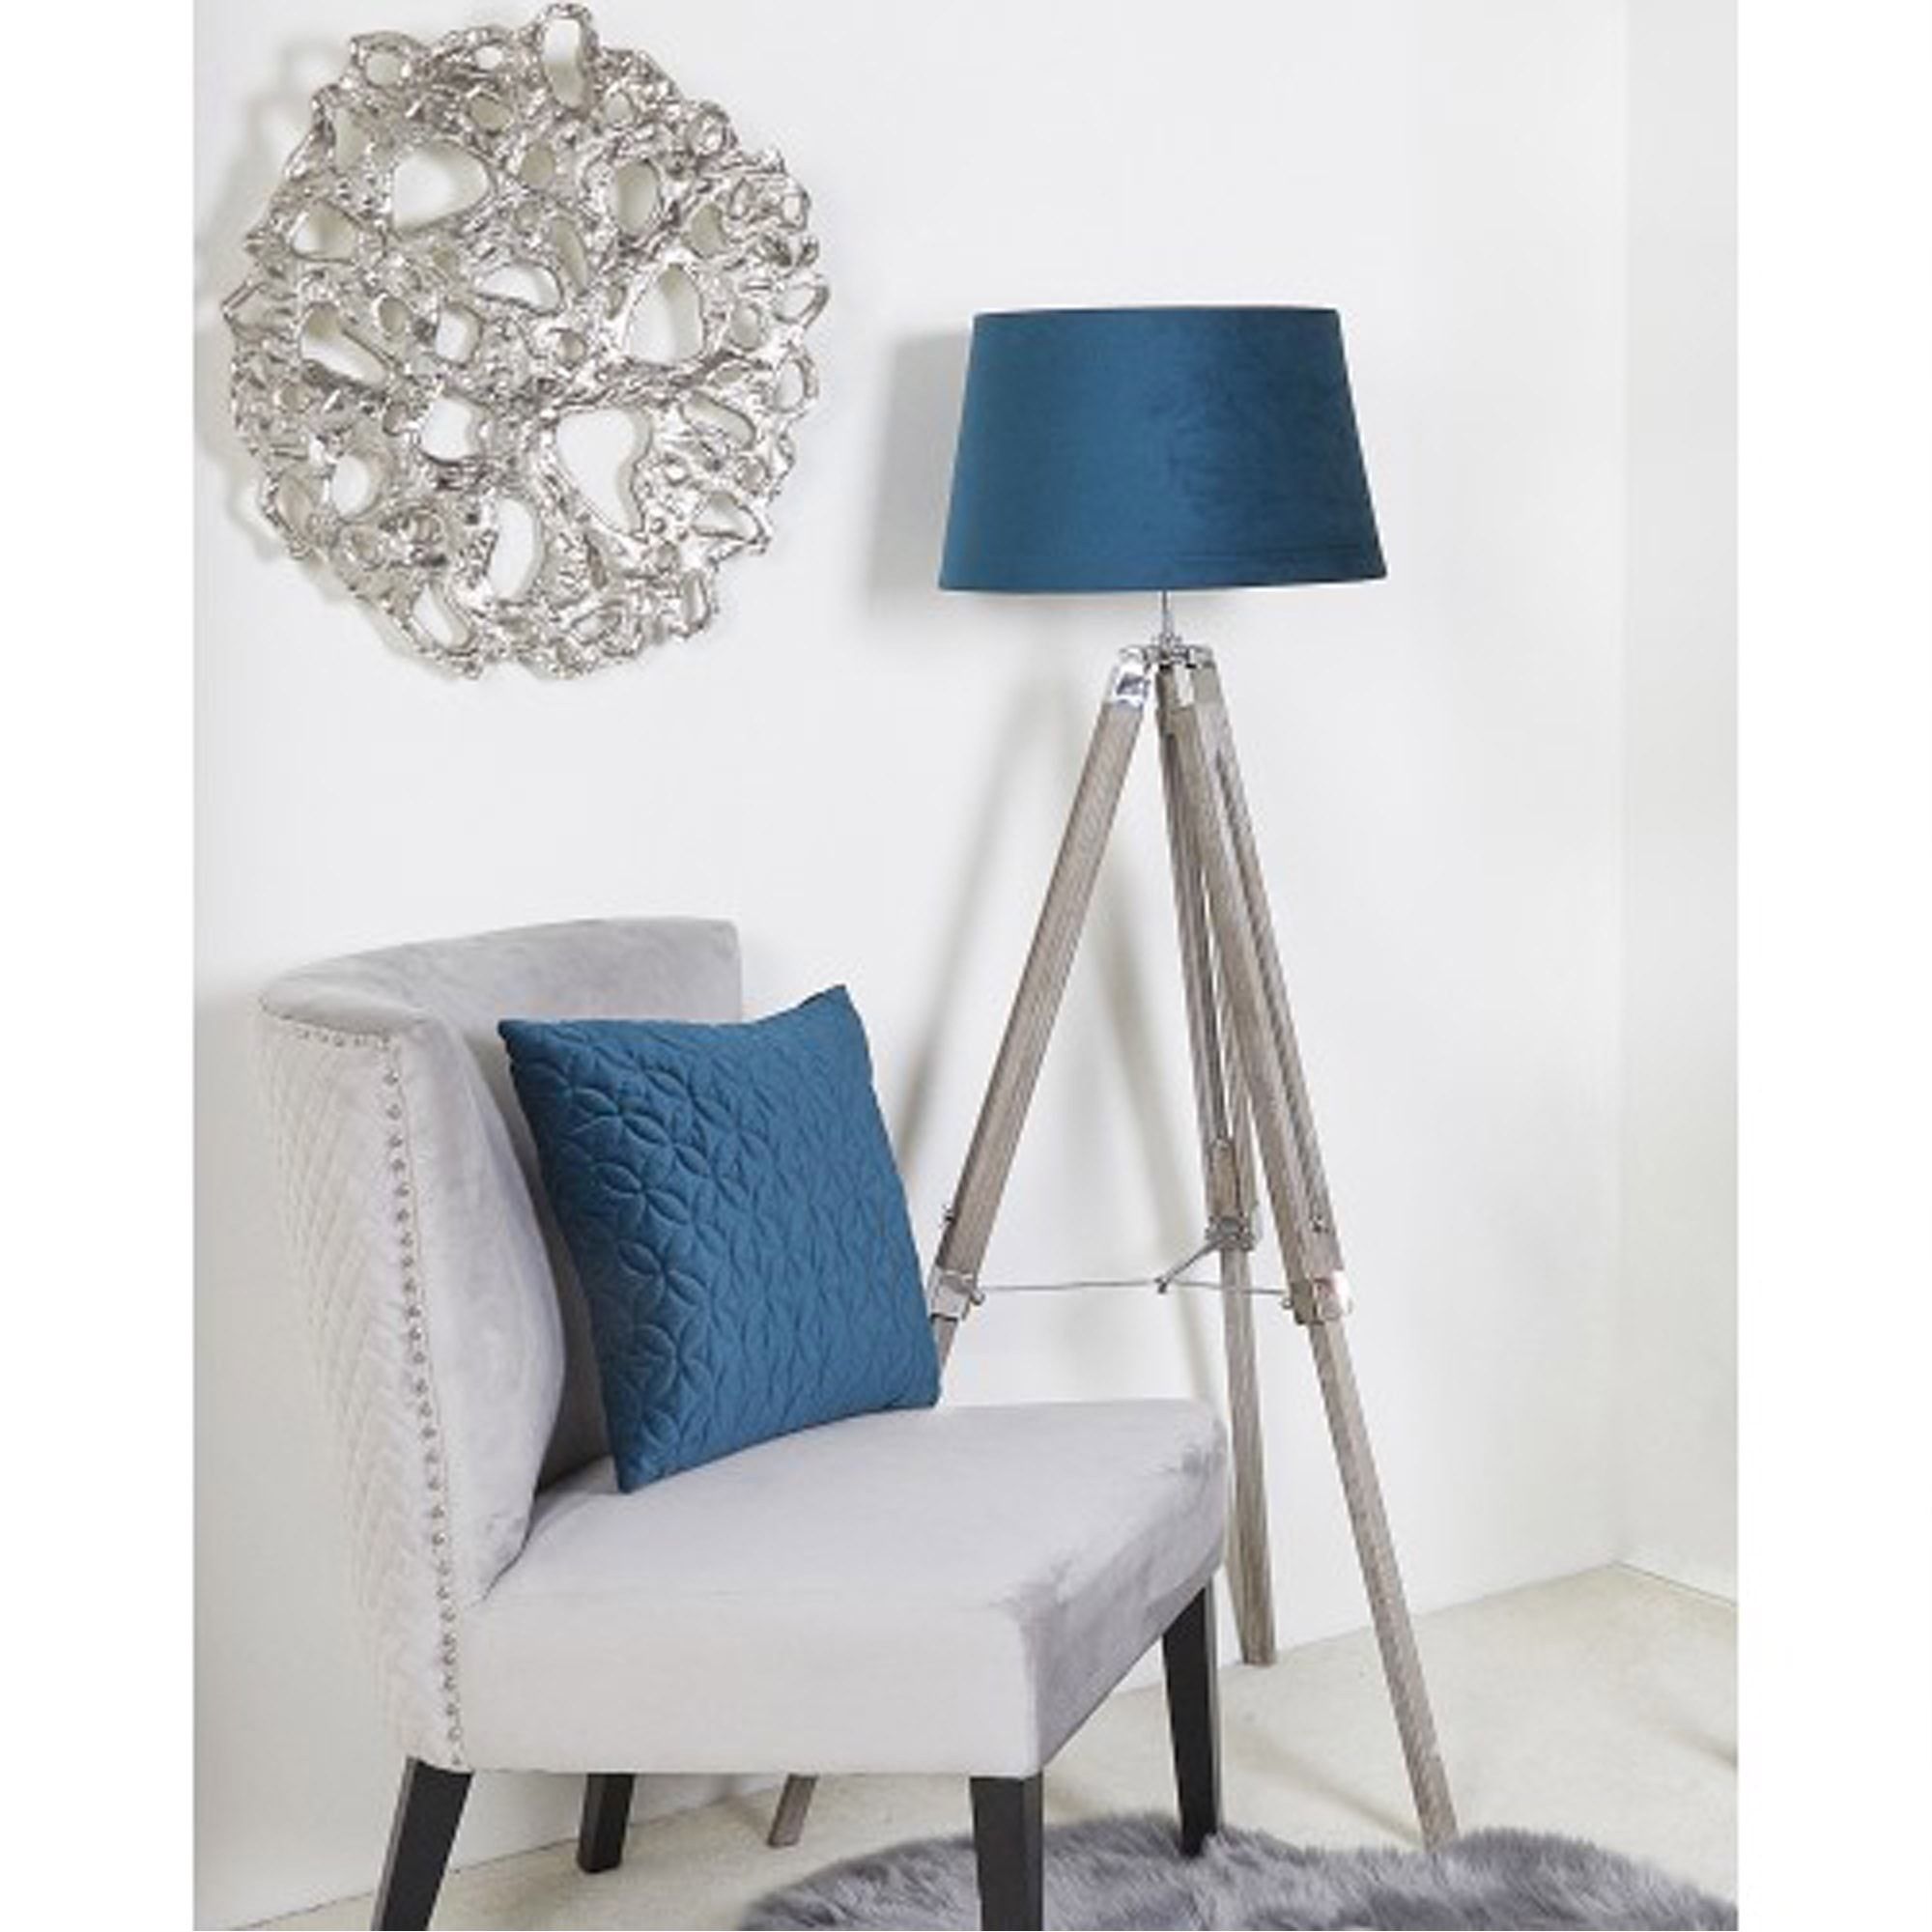 Wood Tripod Floor Lamp With Blue Shade | Floor Standing Lamps Inside Blue Floor Lamps (Photo 11 of 15)